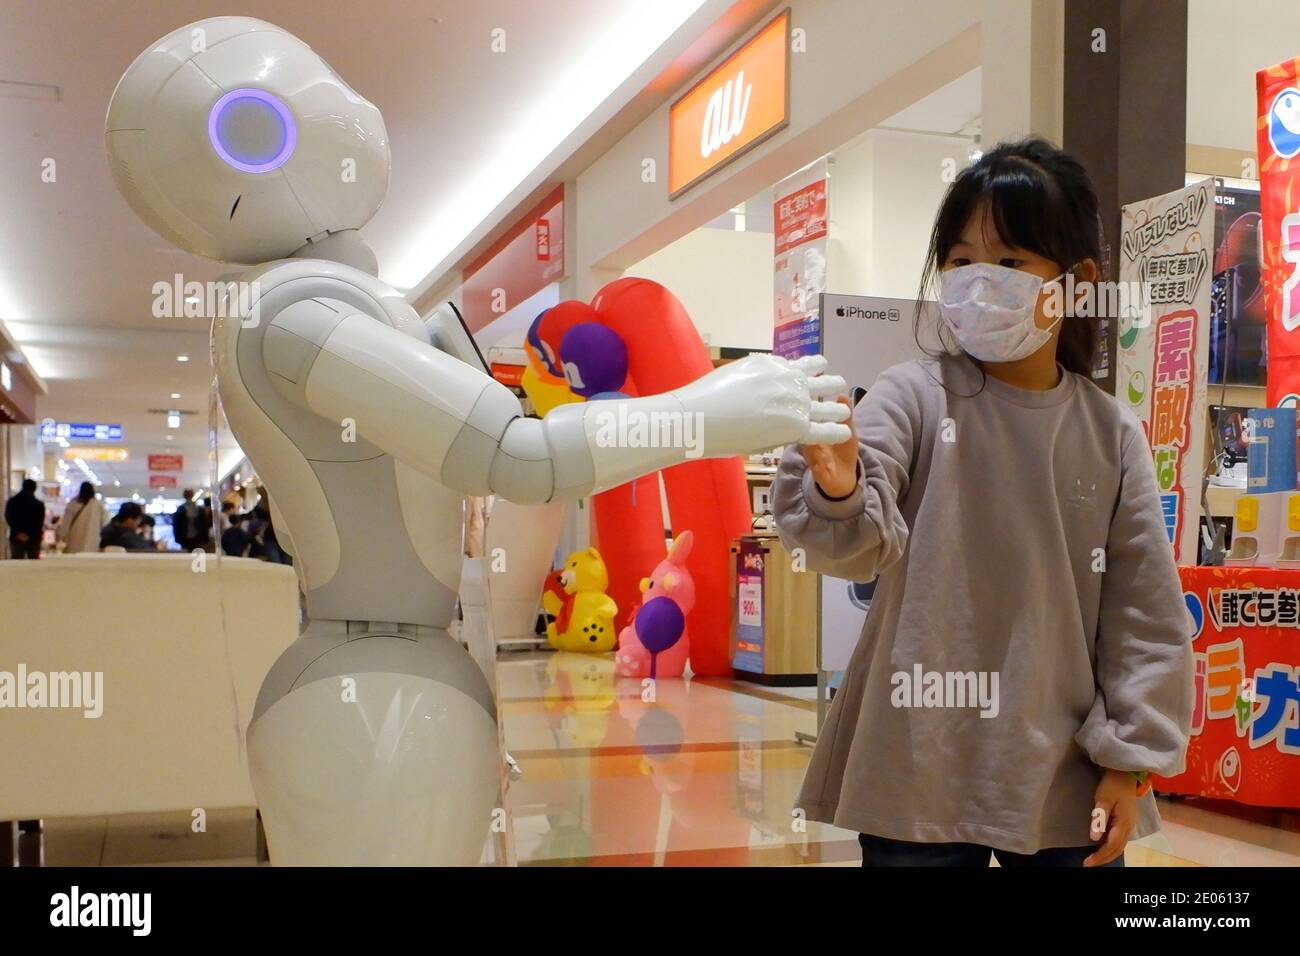 Tokyo, Japan. 30th Dec, 2020. A humanoid robot Pepper wearing a face mask is displayed as Tokyo Metrpolitan Government hires a hotel for the new accomodations of the patients of the new coronavirus with mild symptons in Tokyo.The Tokyo metropolitan government on Wednesday reported 944 new cases of the coronavirus, up 88 from Tuesday. The number is the result of 2,084 tests conducted on Dec 27. (Photo by Michele Sawada/Sipa USA) Credit: Sipa USA/Alamy Live News Stock Photo